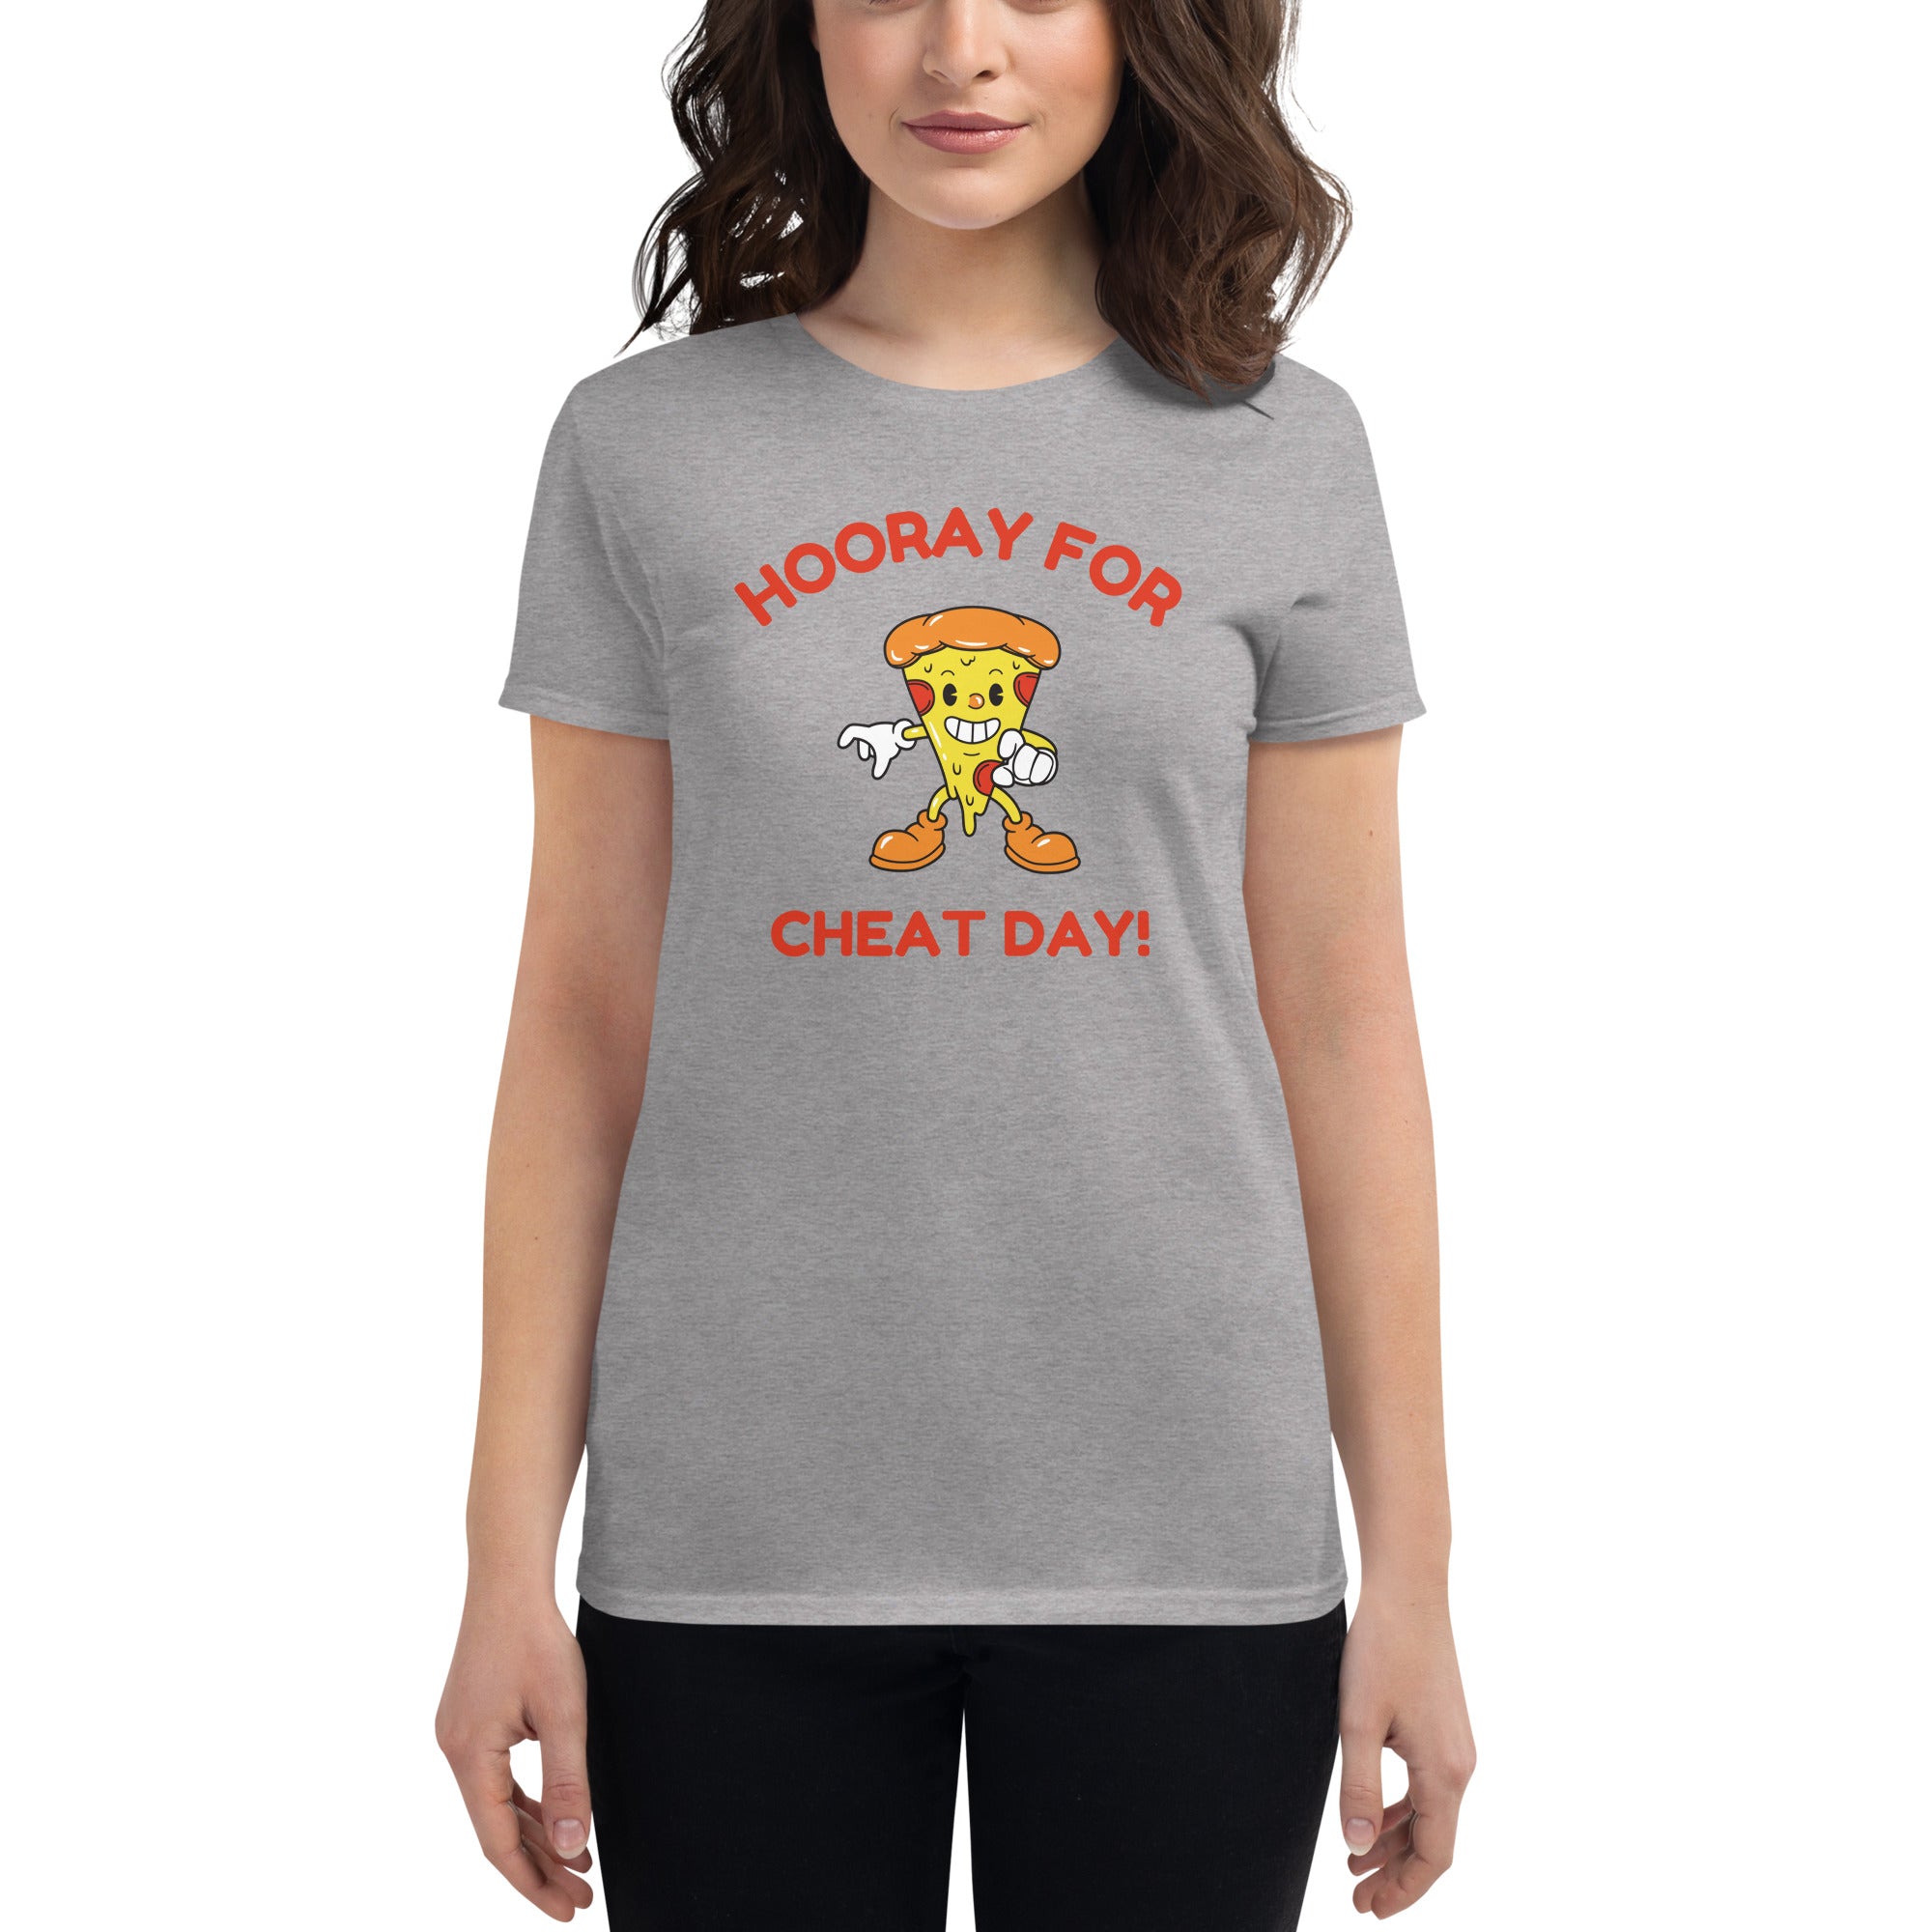 Hooray For Cheat Day! Women's Fitted T-Shirt